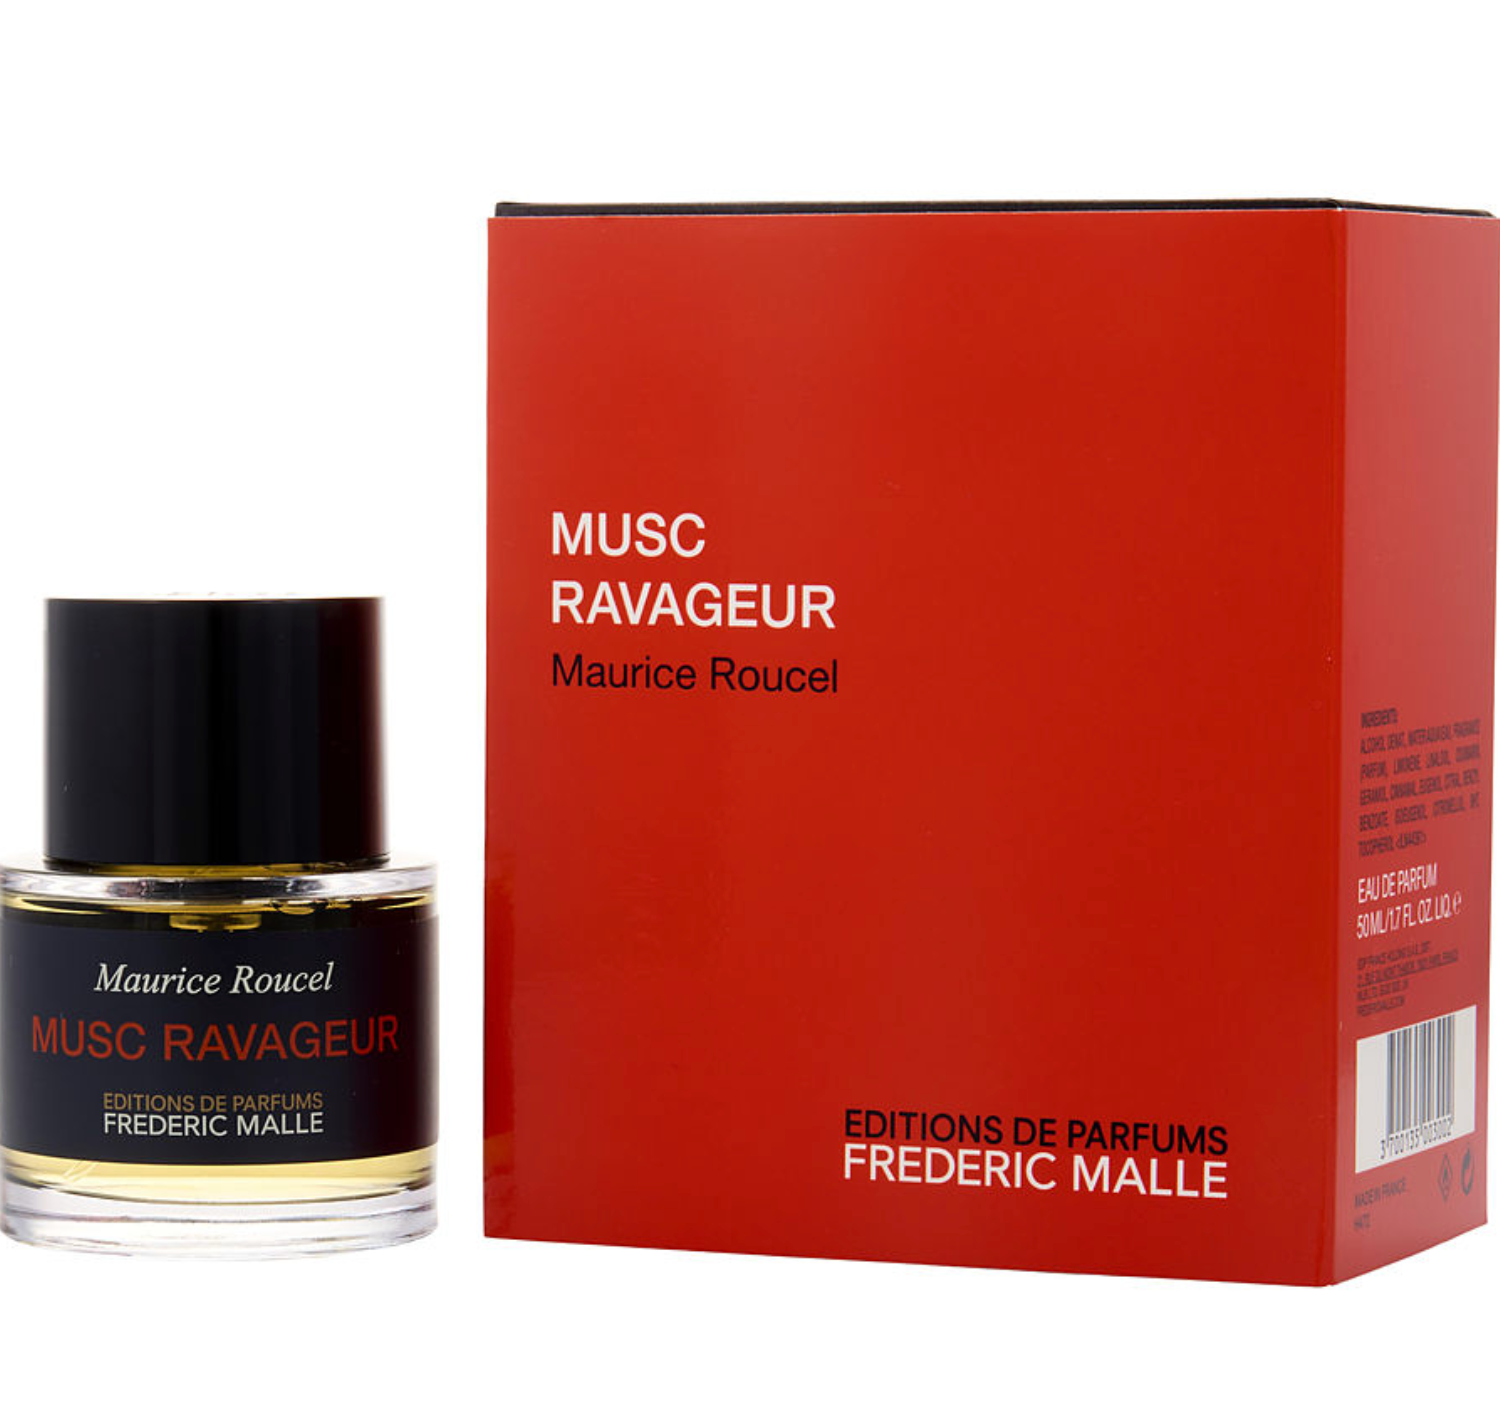 3.4 oz bottle of frederic malle's musc ravageur and packaging